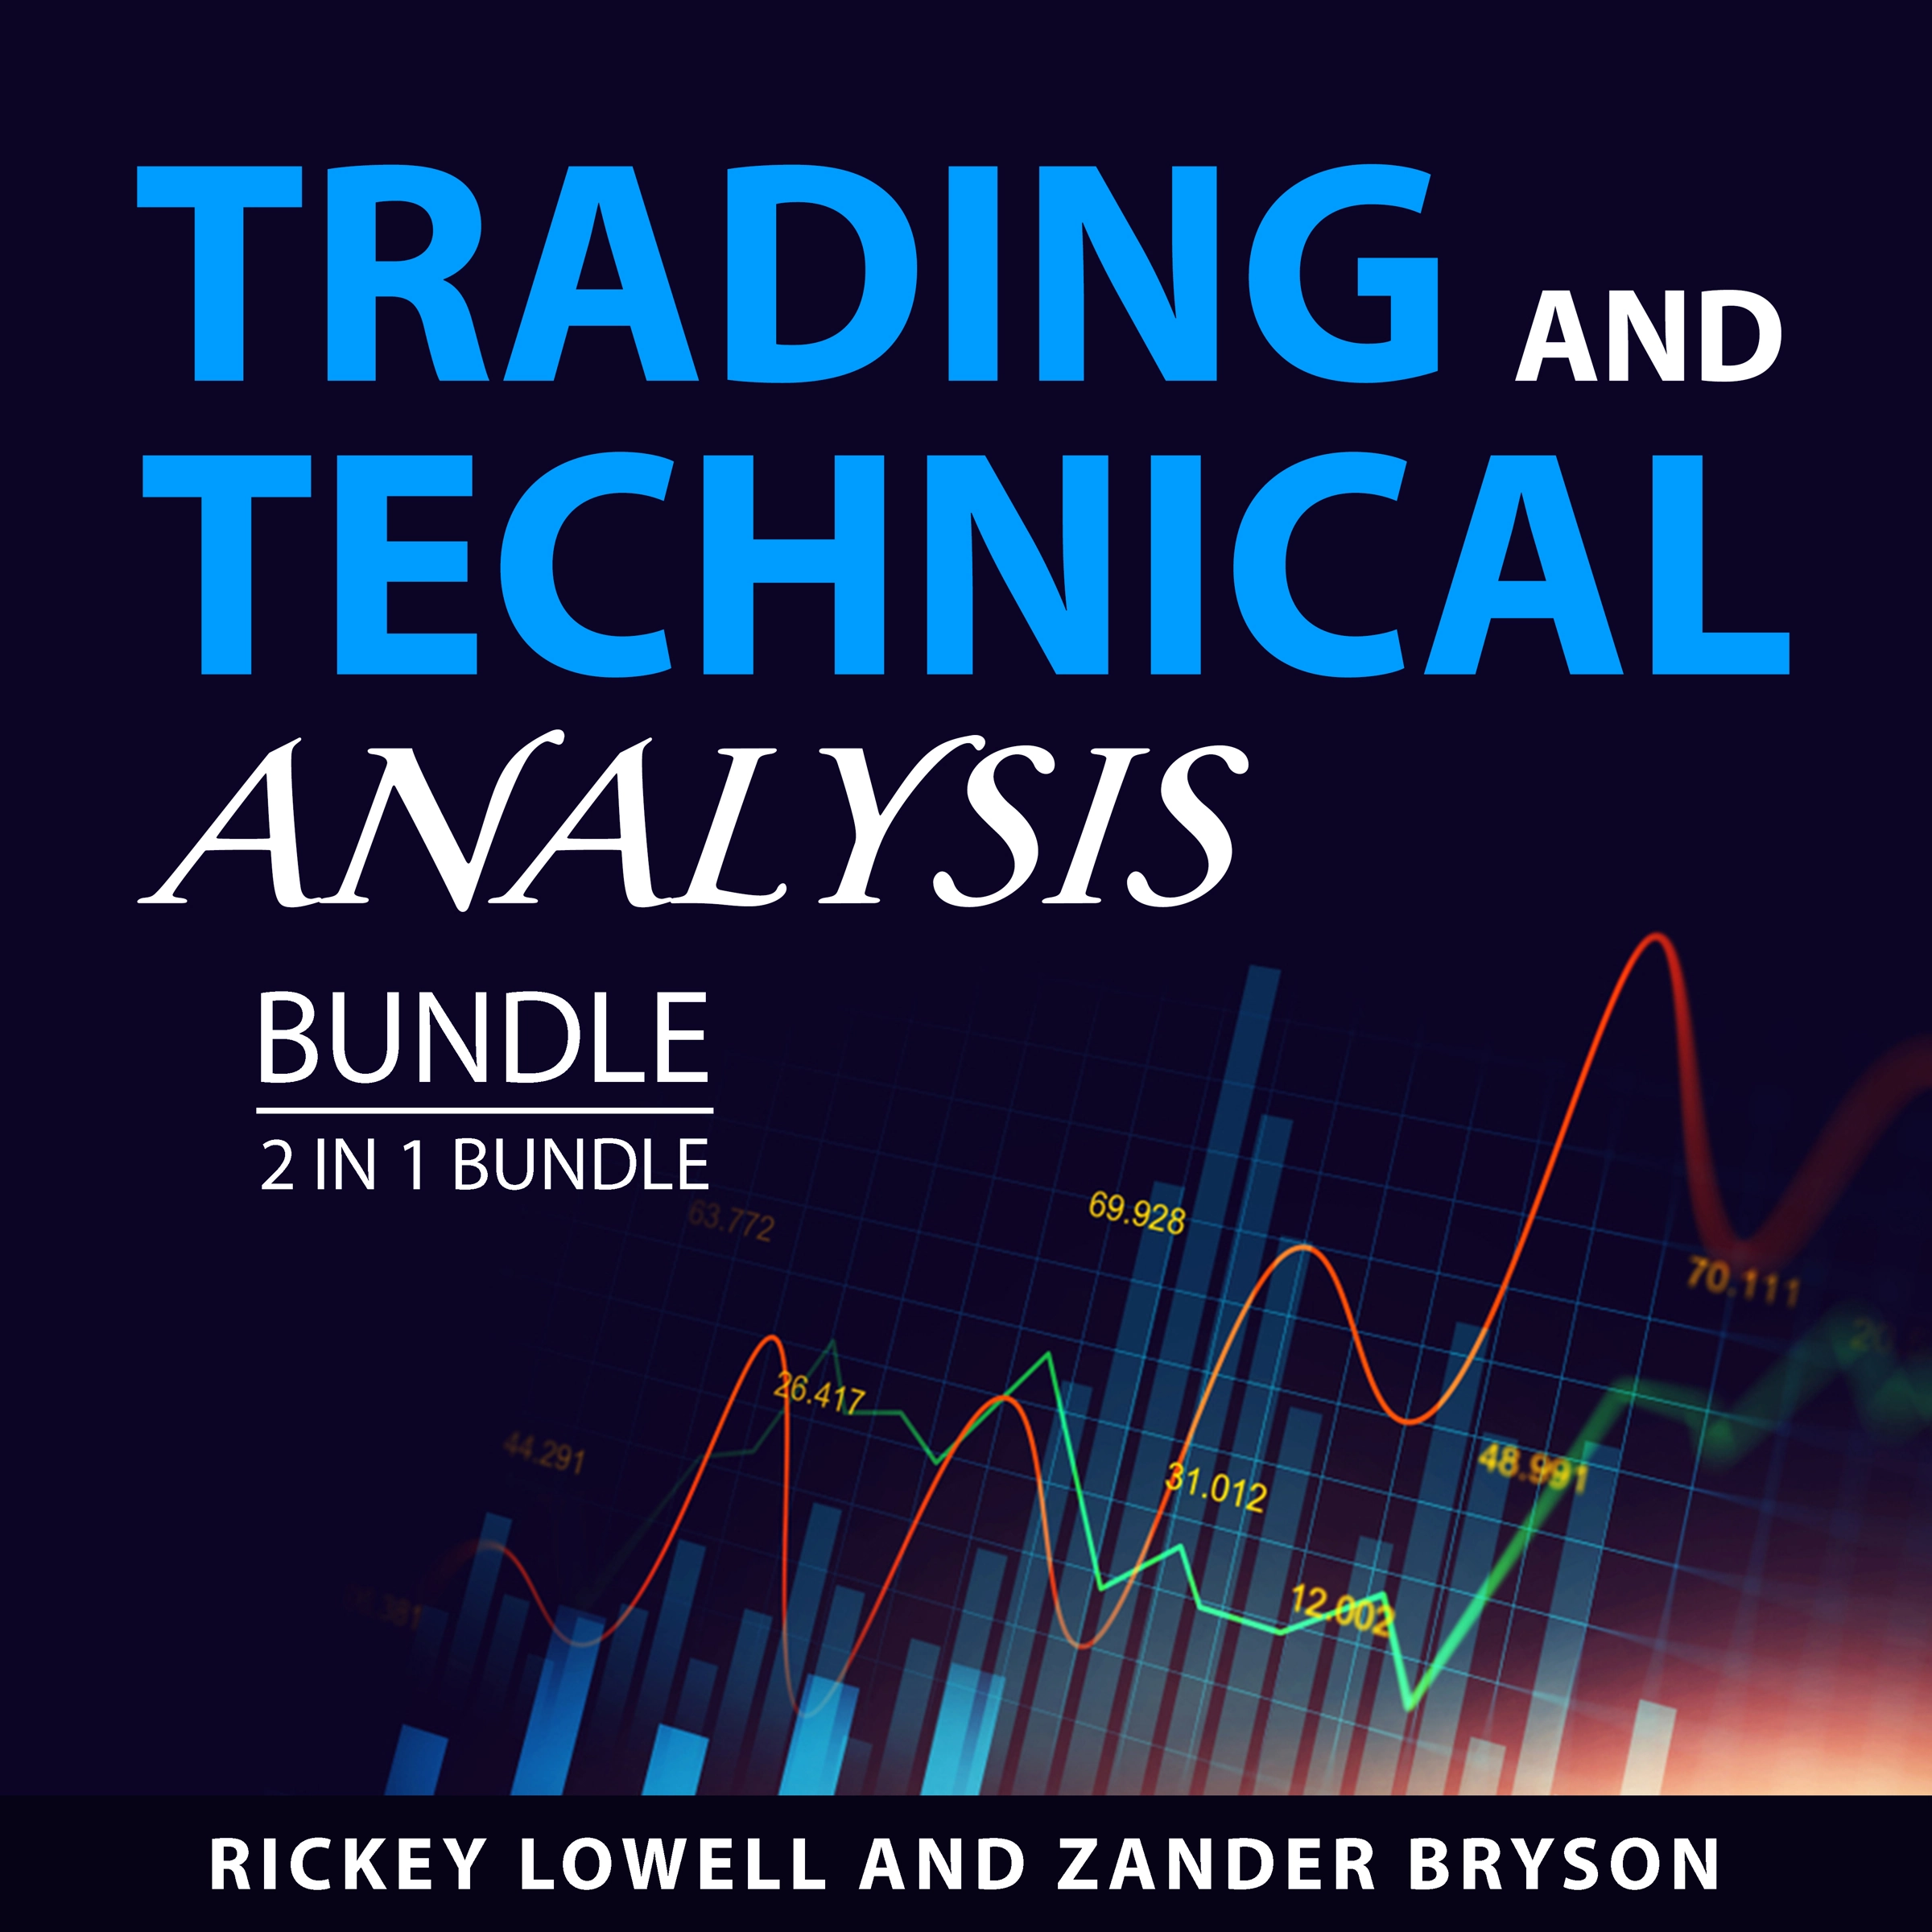 Trading and Technical Analysis Bundle, 2 in 1 Bundle Audiobook by Zander Bryson